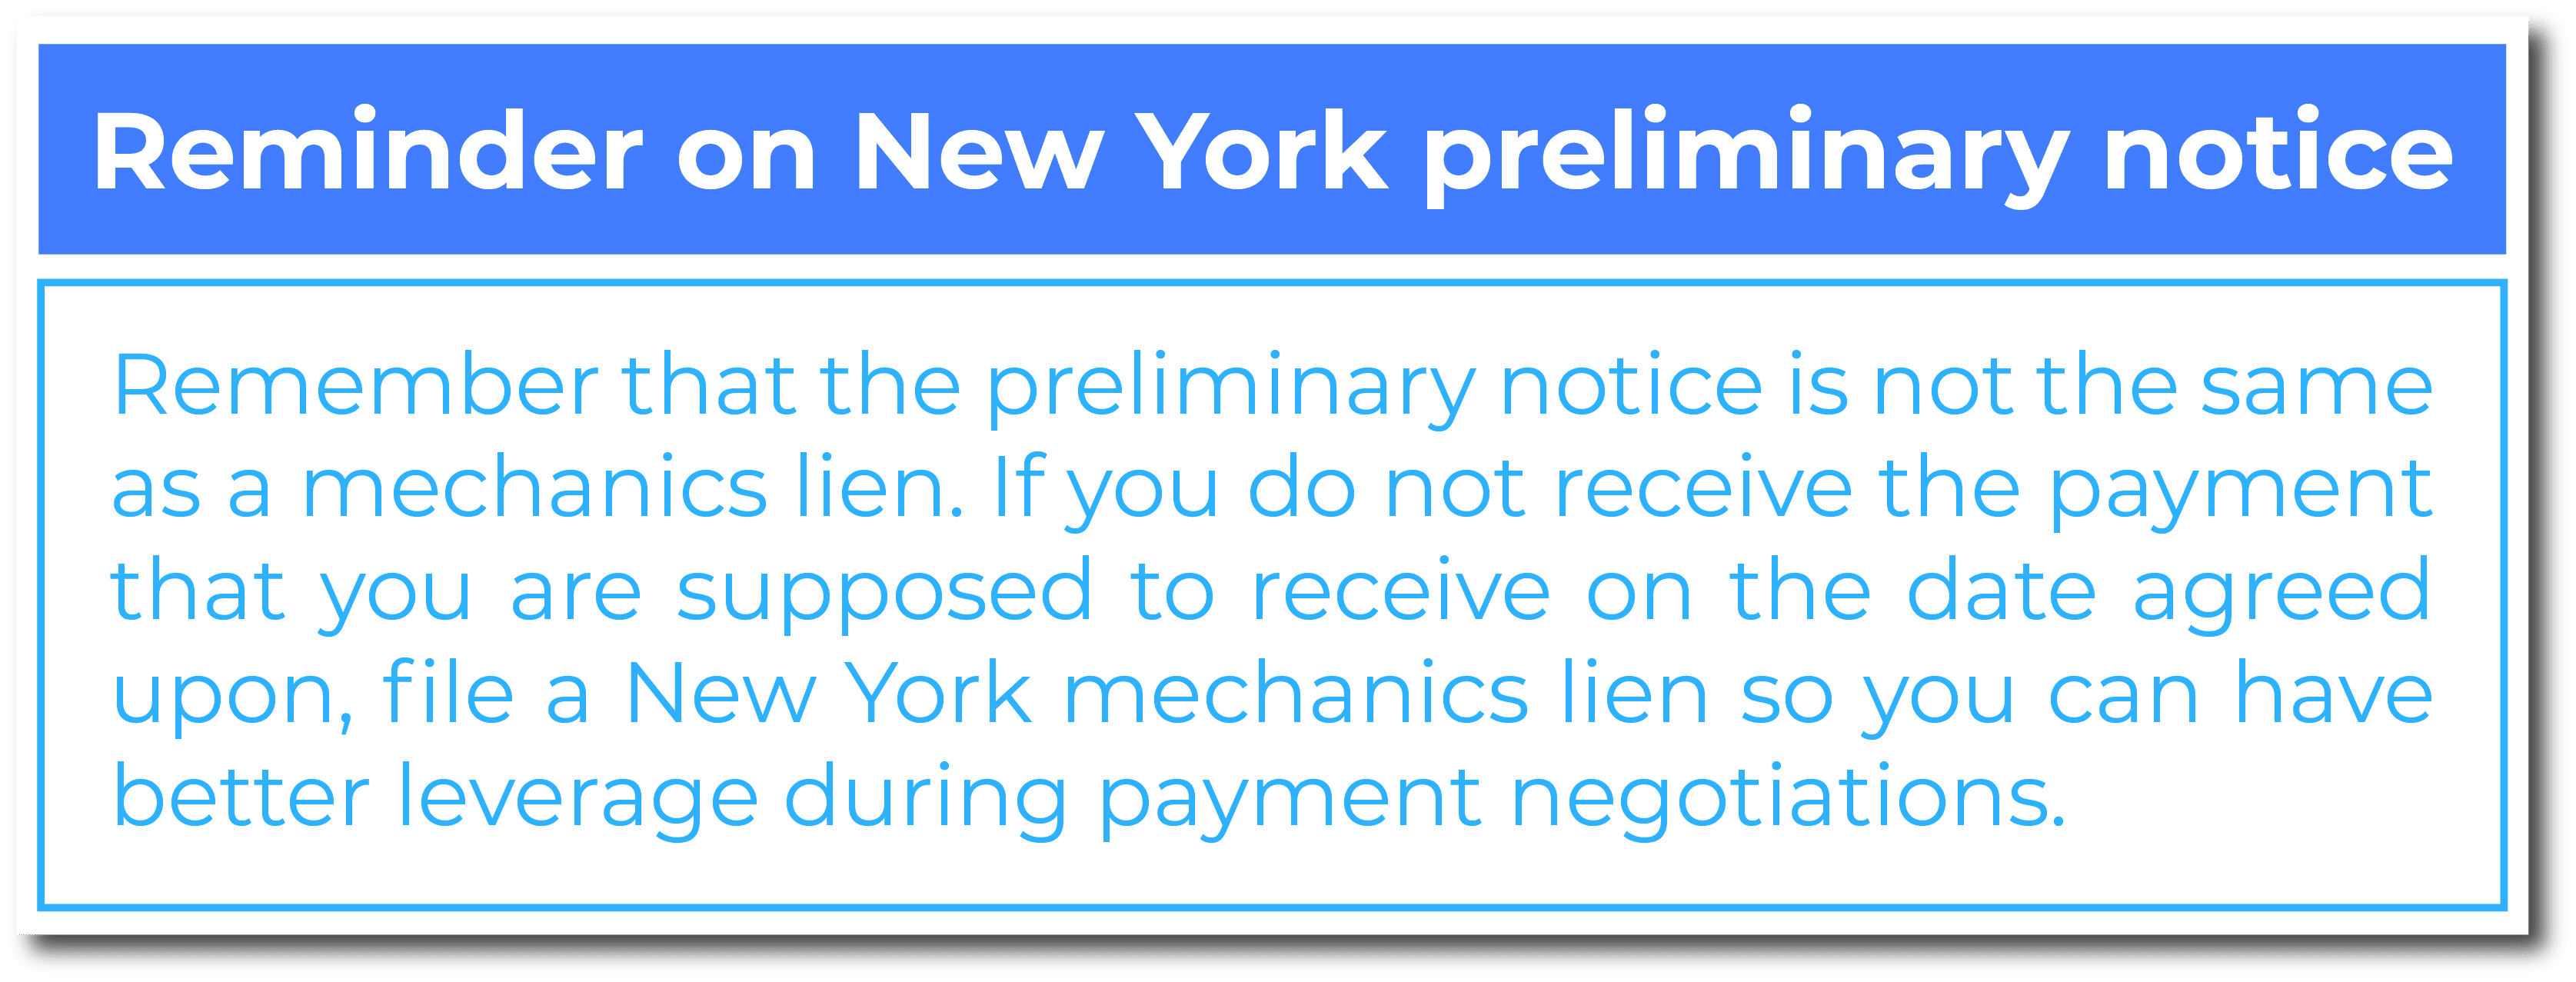 Reminder on New York preliminary notice